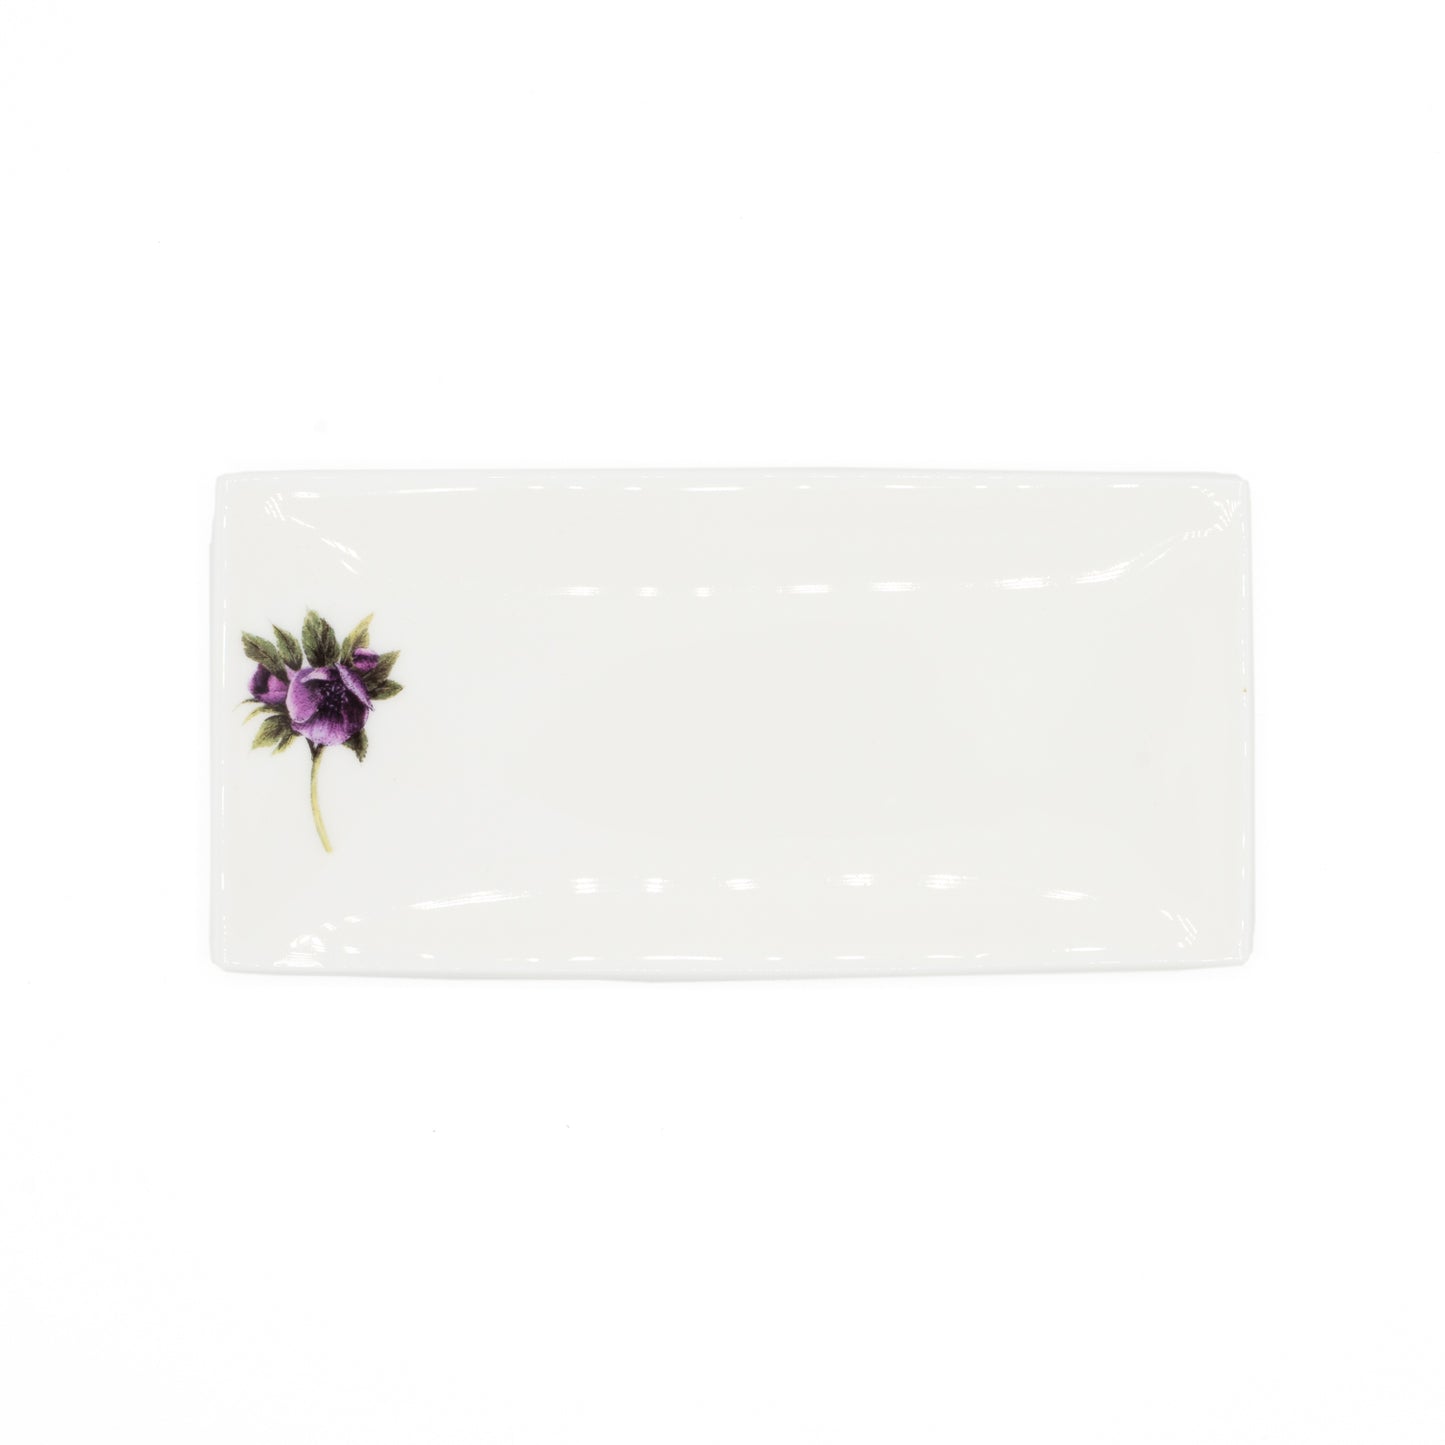 White rectangular soap dish with an illustration of a hellebore flower. Photgoraphed against white background.